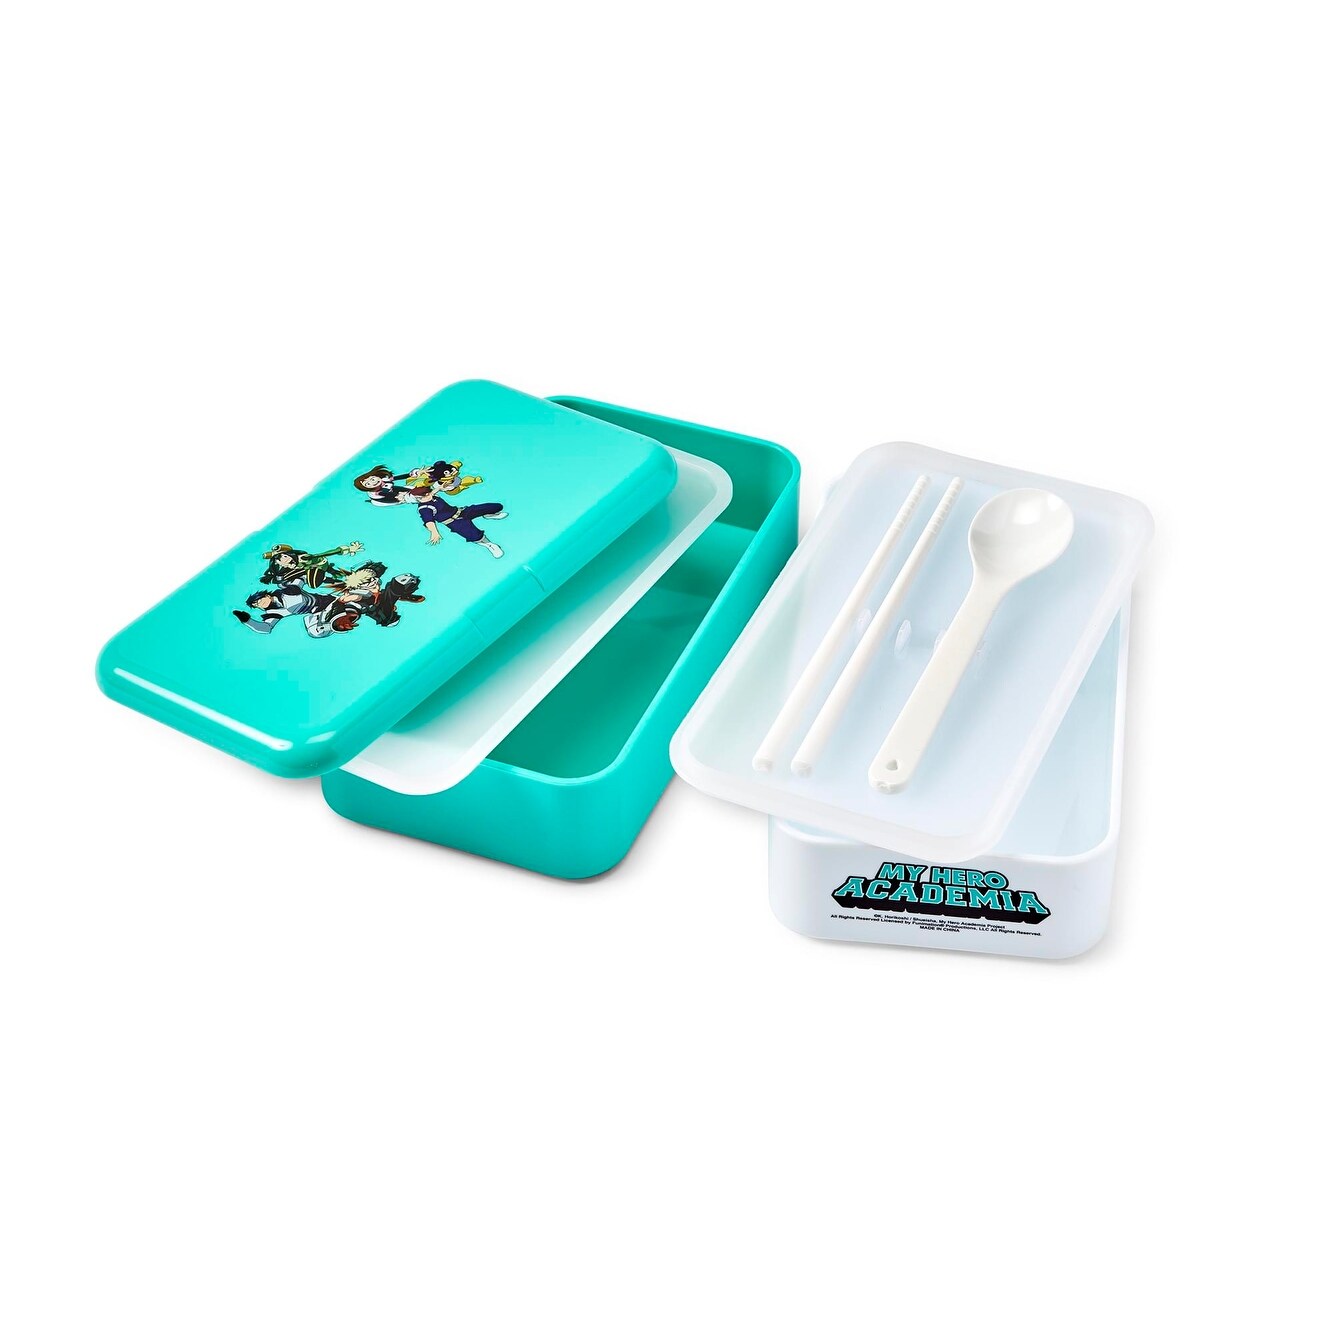 https://ak1.ostkcdn.com/images/products/is/images/direct/64b7c1c52da90726ffa9c23cb28f7ce59fef5909/My-Hero-Academia-Mint-Green-Stackable-Bento-Lunch-Box.jpg